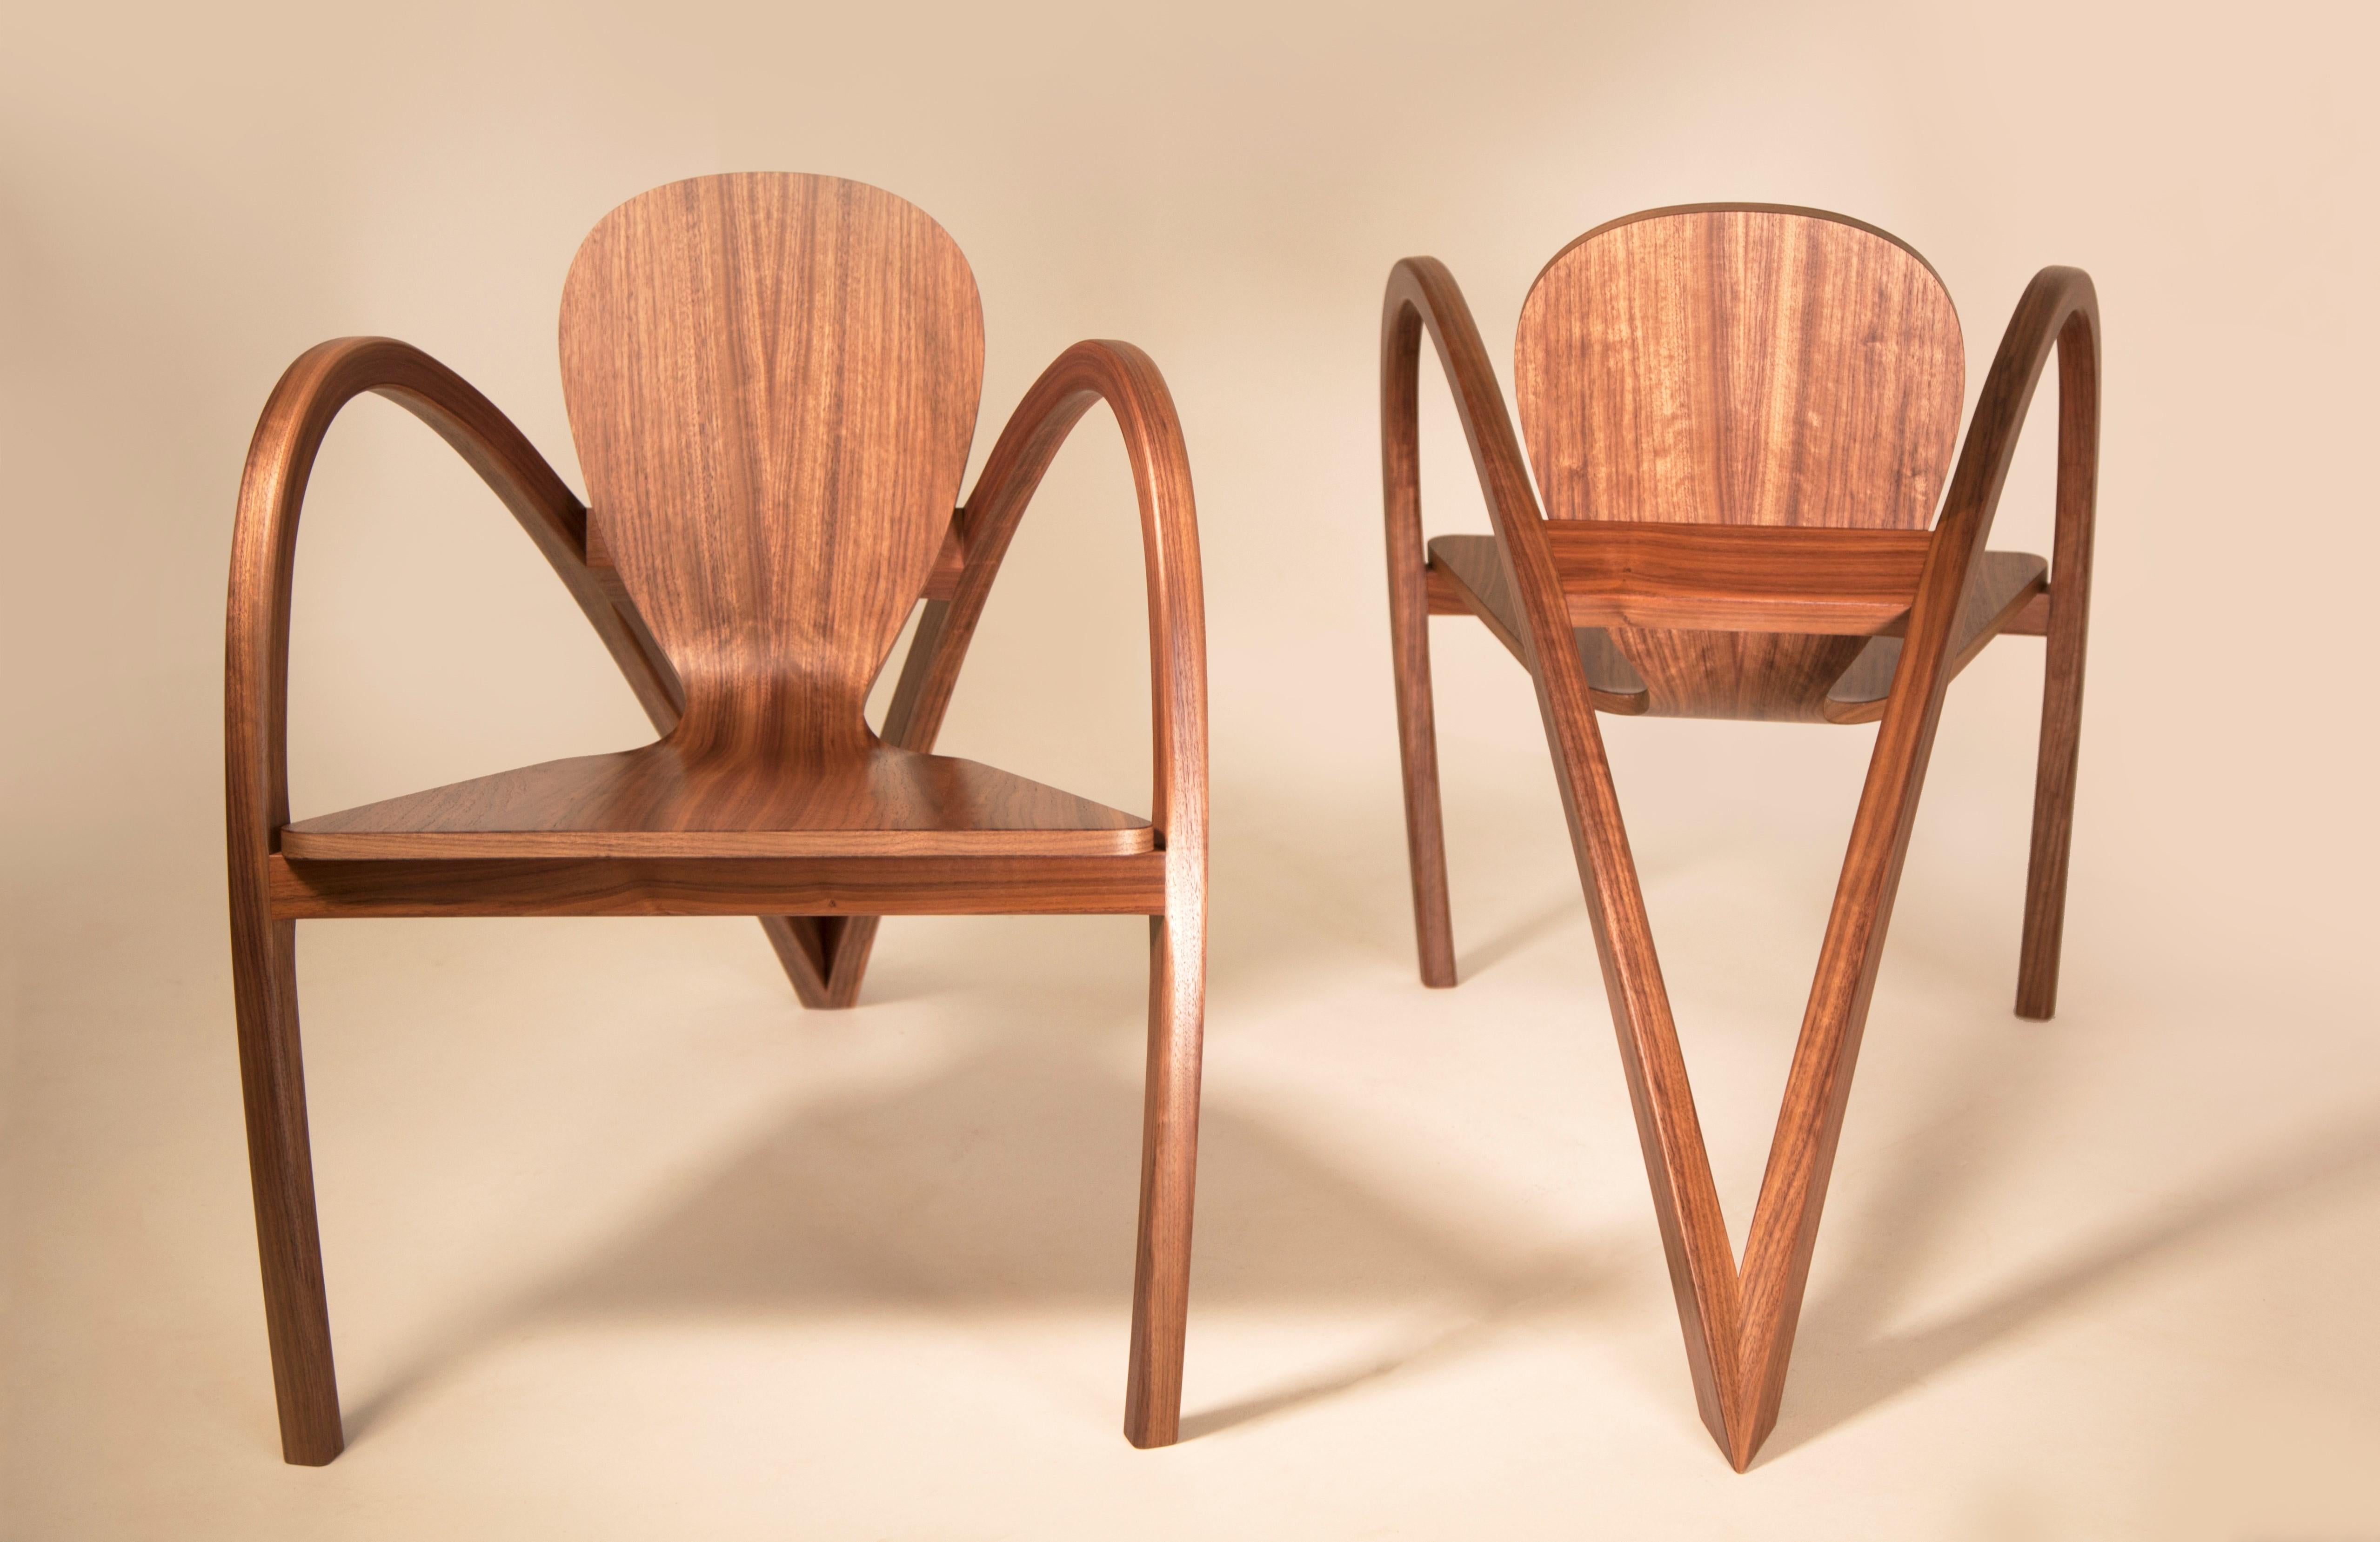 A stunning pair of chairs that pay homage to the iconic shapes and lines of 1930s automobiles. Our chairs are meticulously handcrafted in our Westhampton Beach studio using over 50 layers of consecutive veneers, which are glued together over a mold